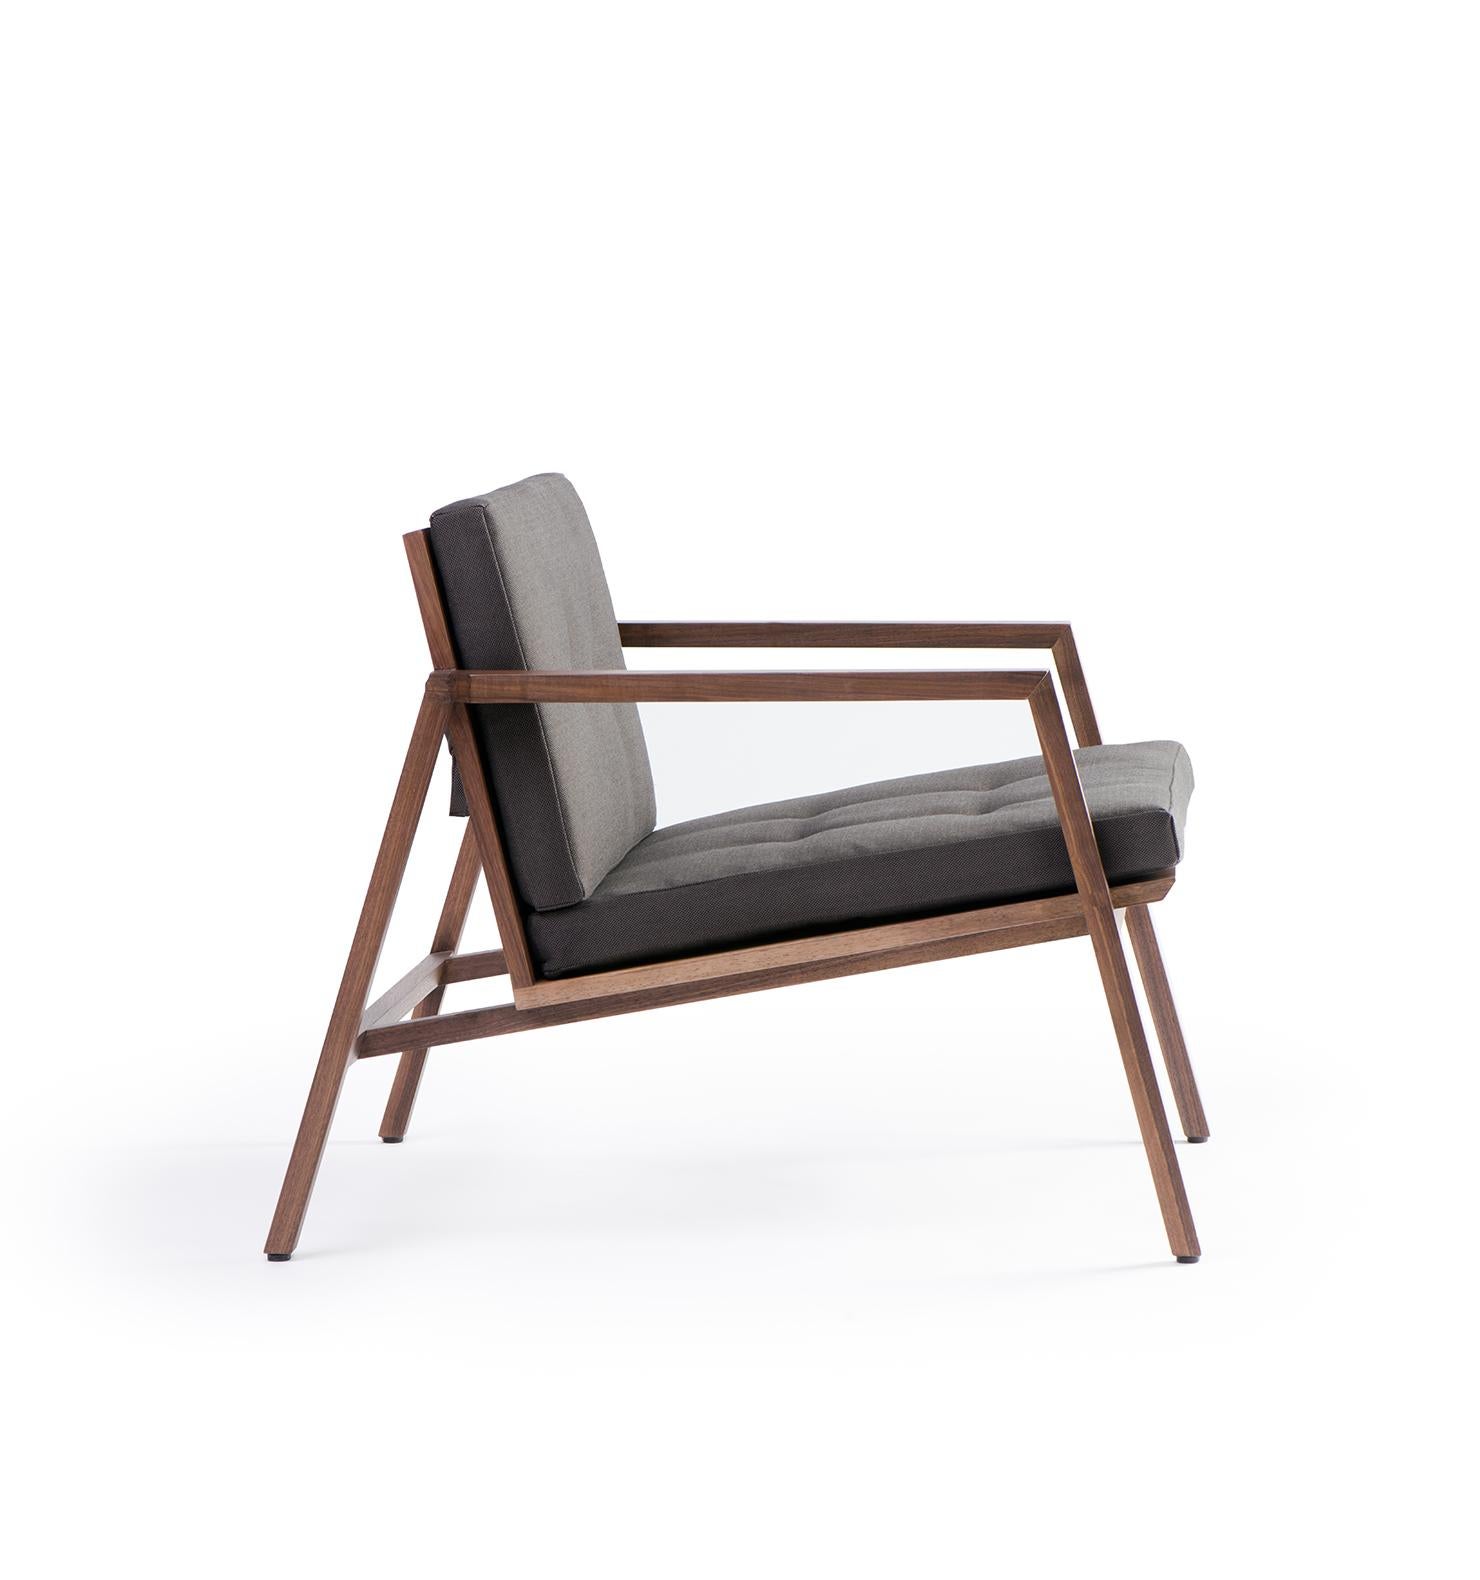 Modern Tumbona Dedo, Mexican Contemporary Lounge Chair by Emiliano Molina for CUCHARA For Sale